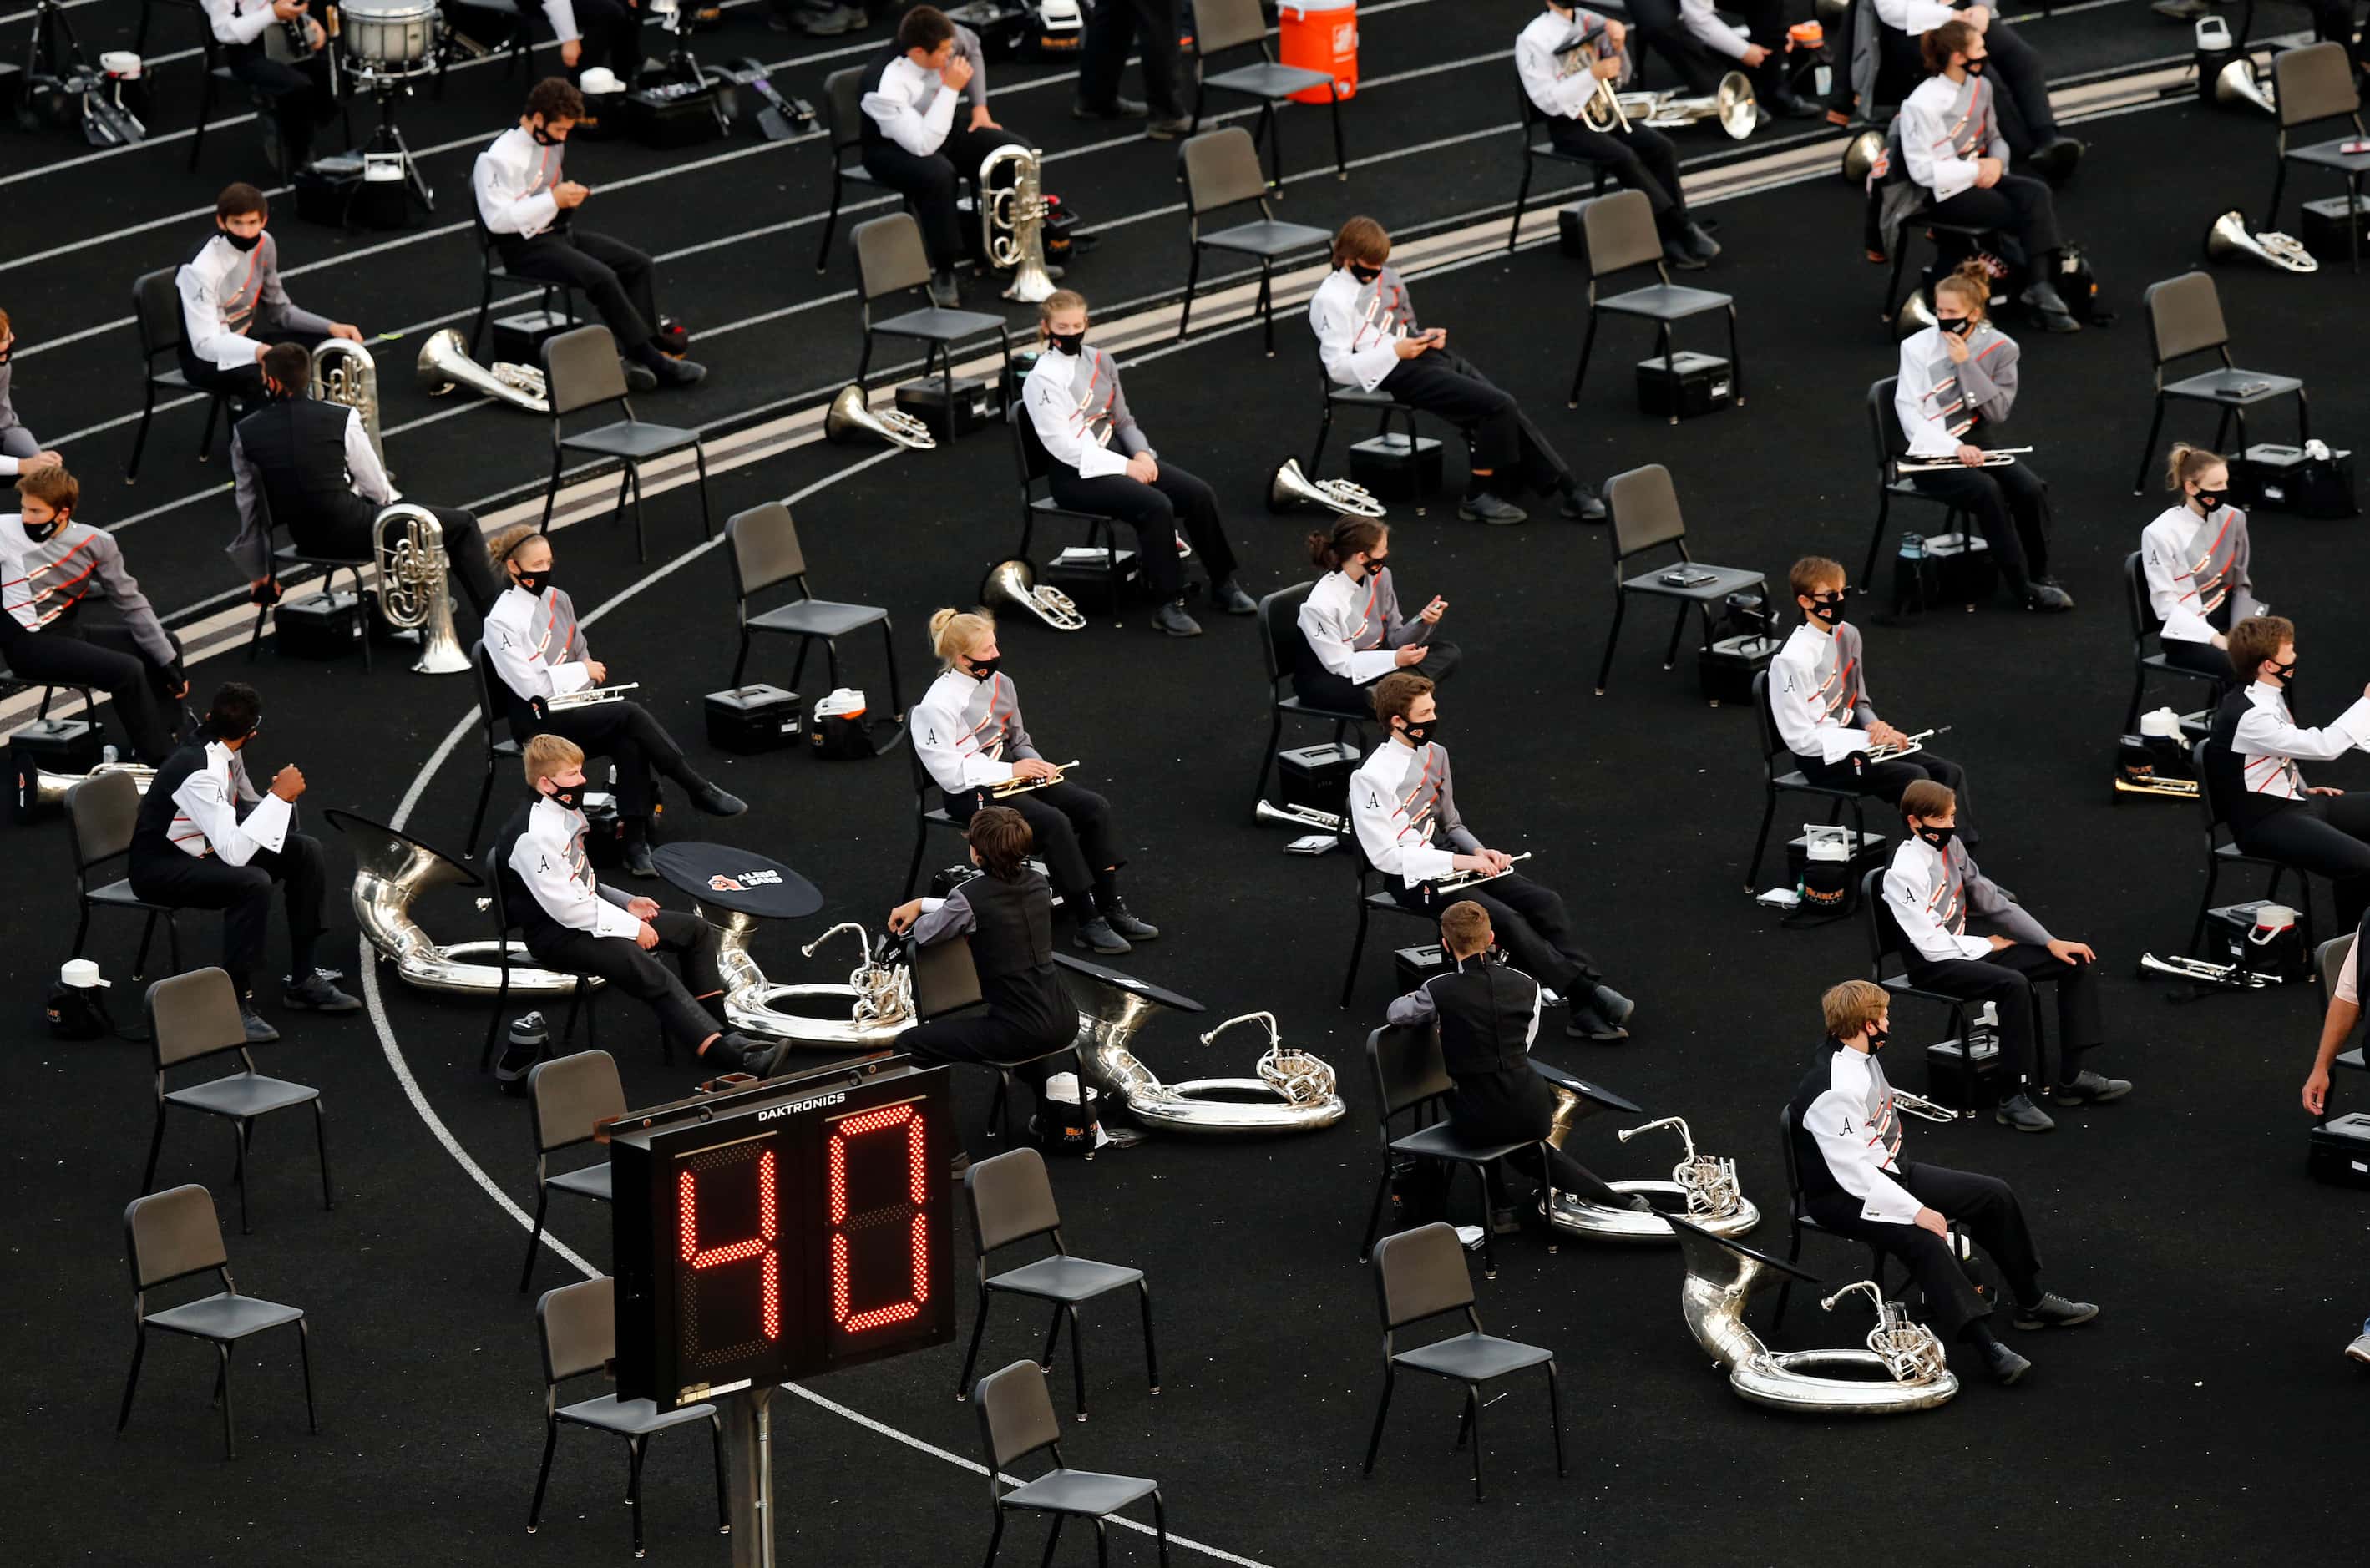 The Aledo band is socially-distanced as they wait to perform during the Frisco Lone Star...